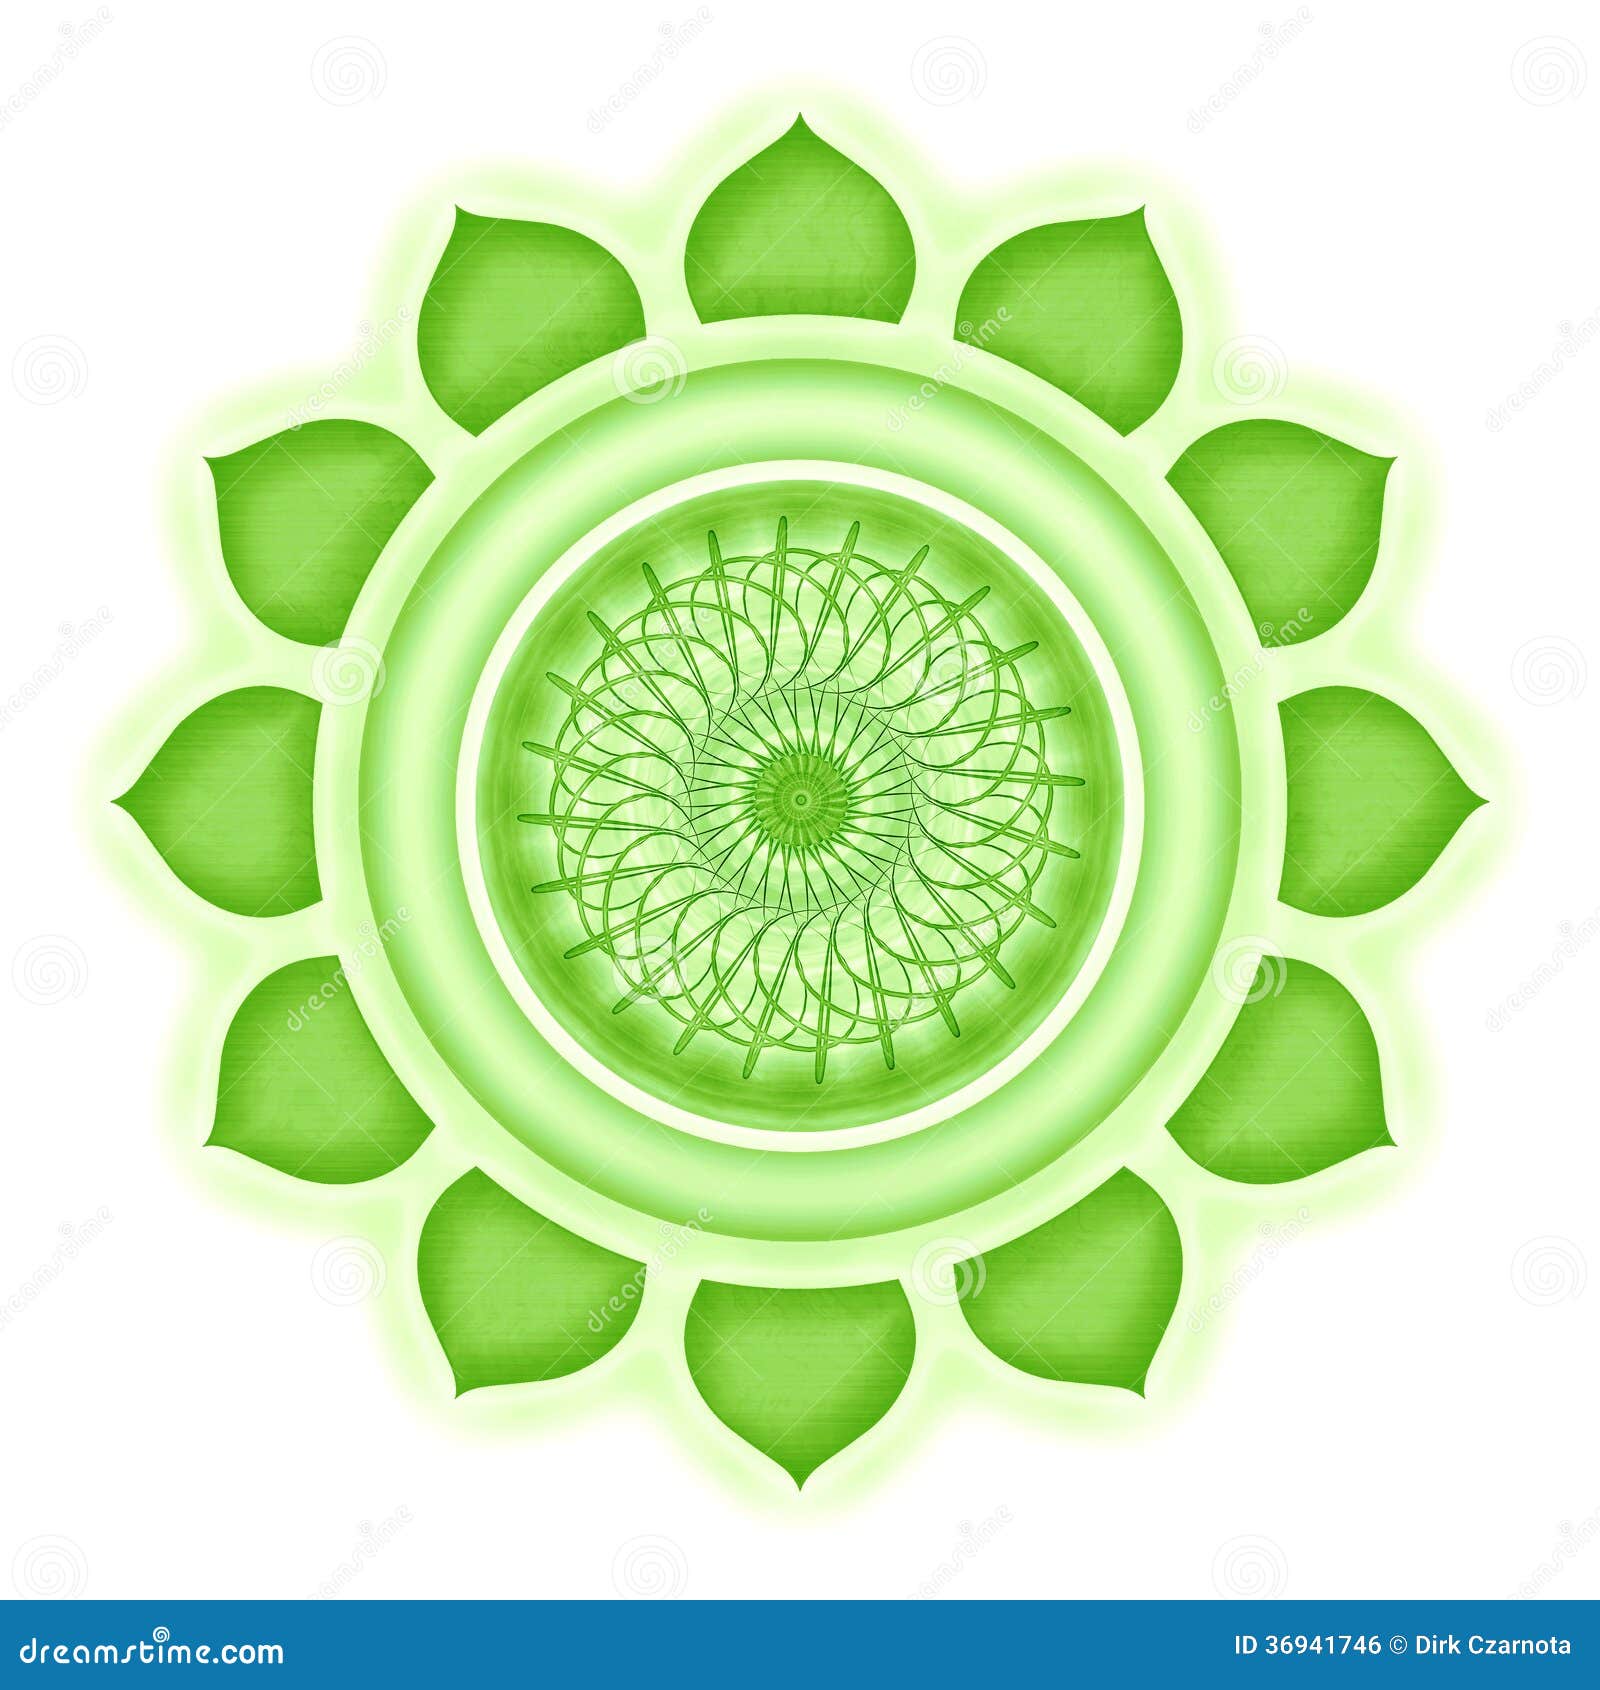 Anahata chakra design Stock Vector by ©Den.the.Grate@gmail.com